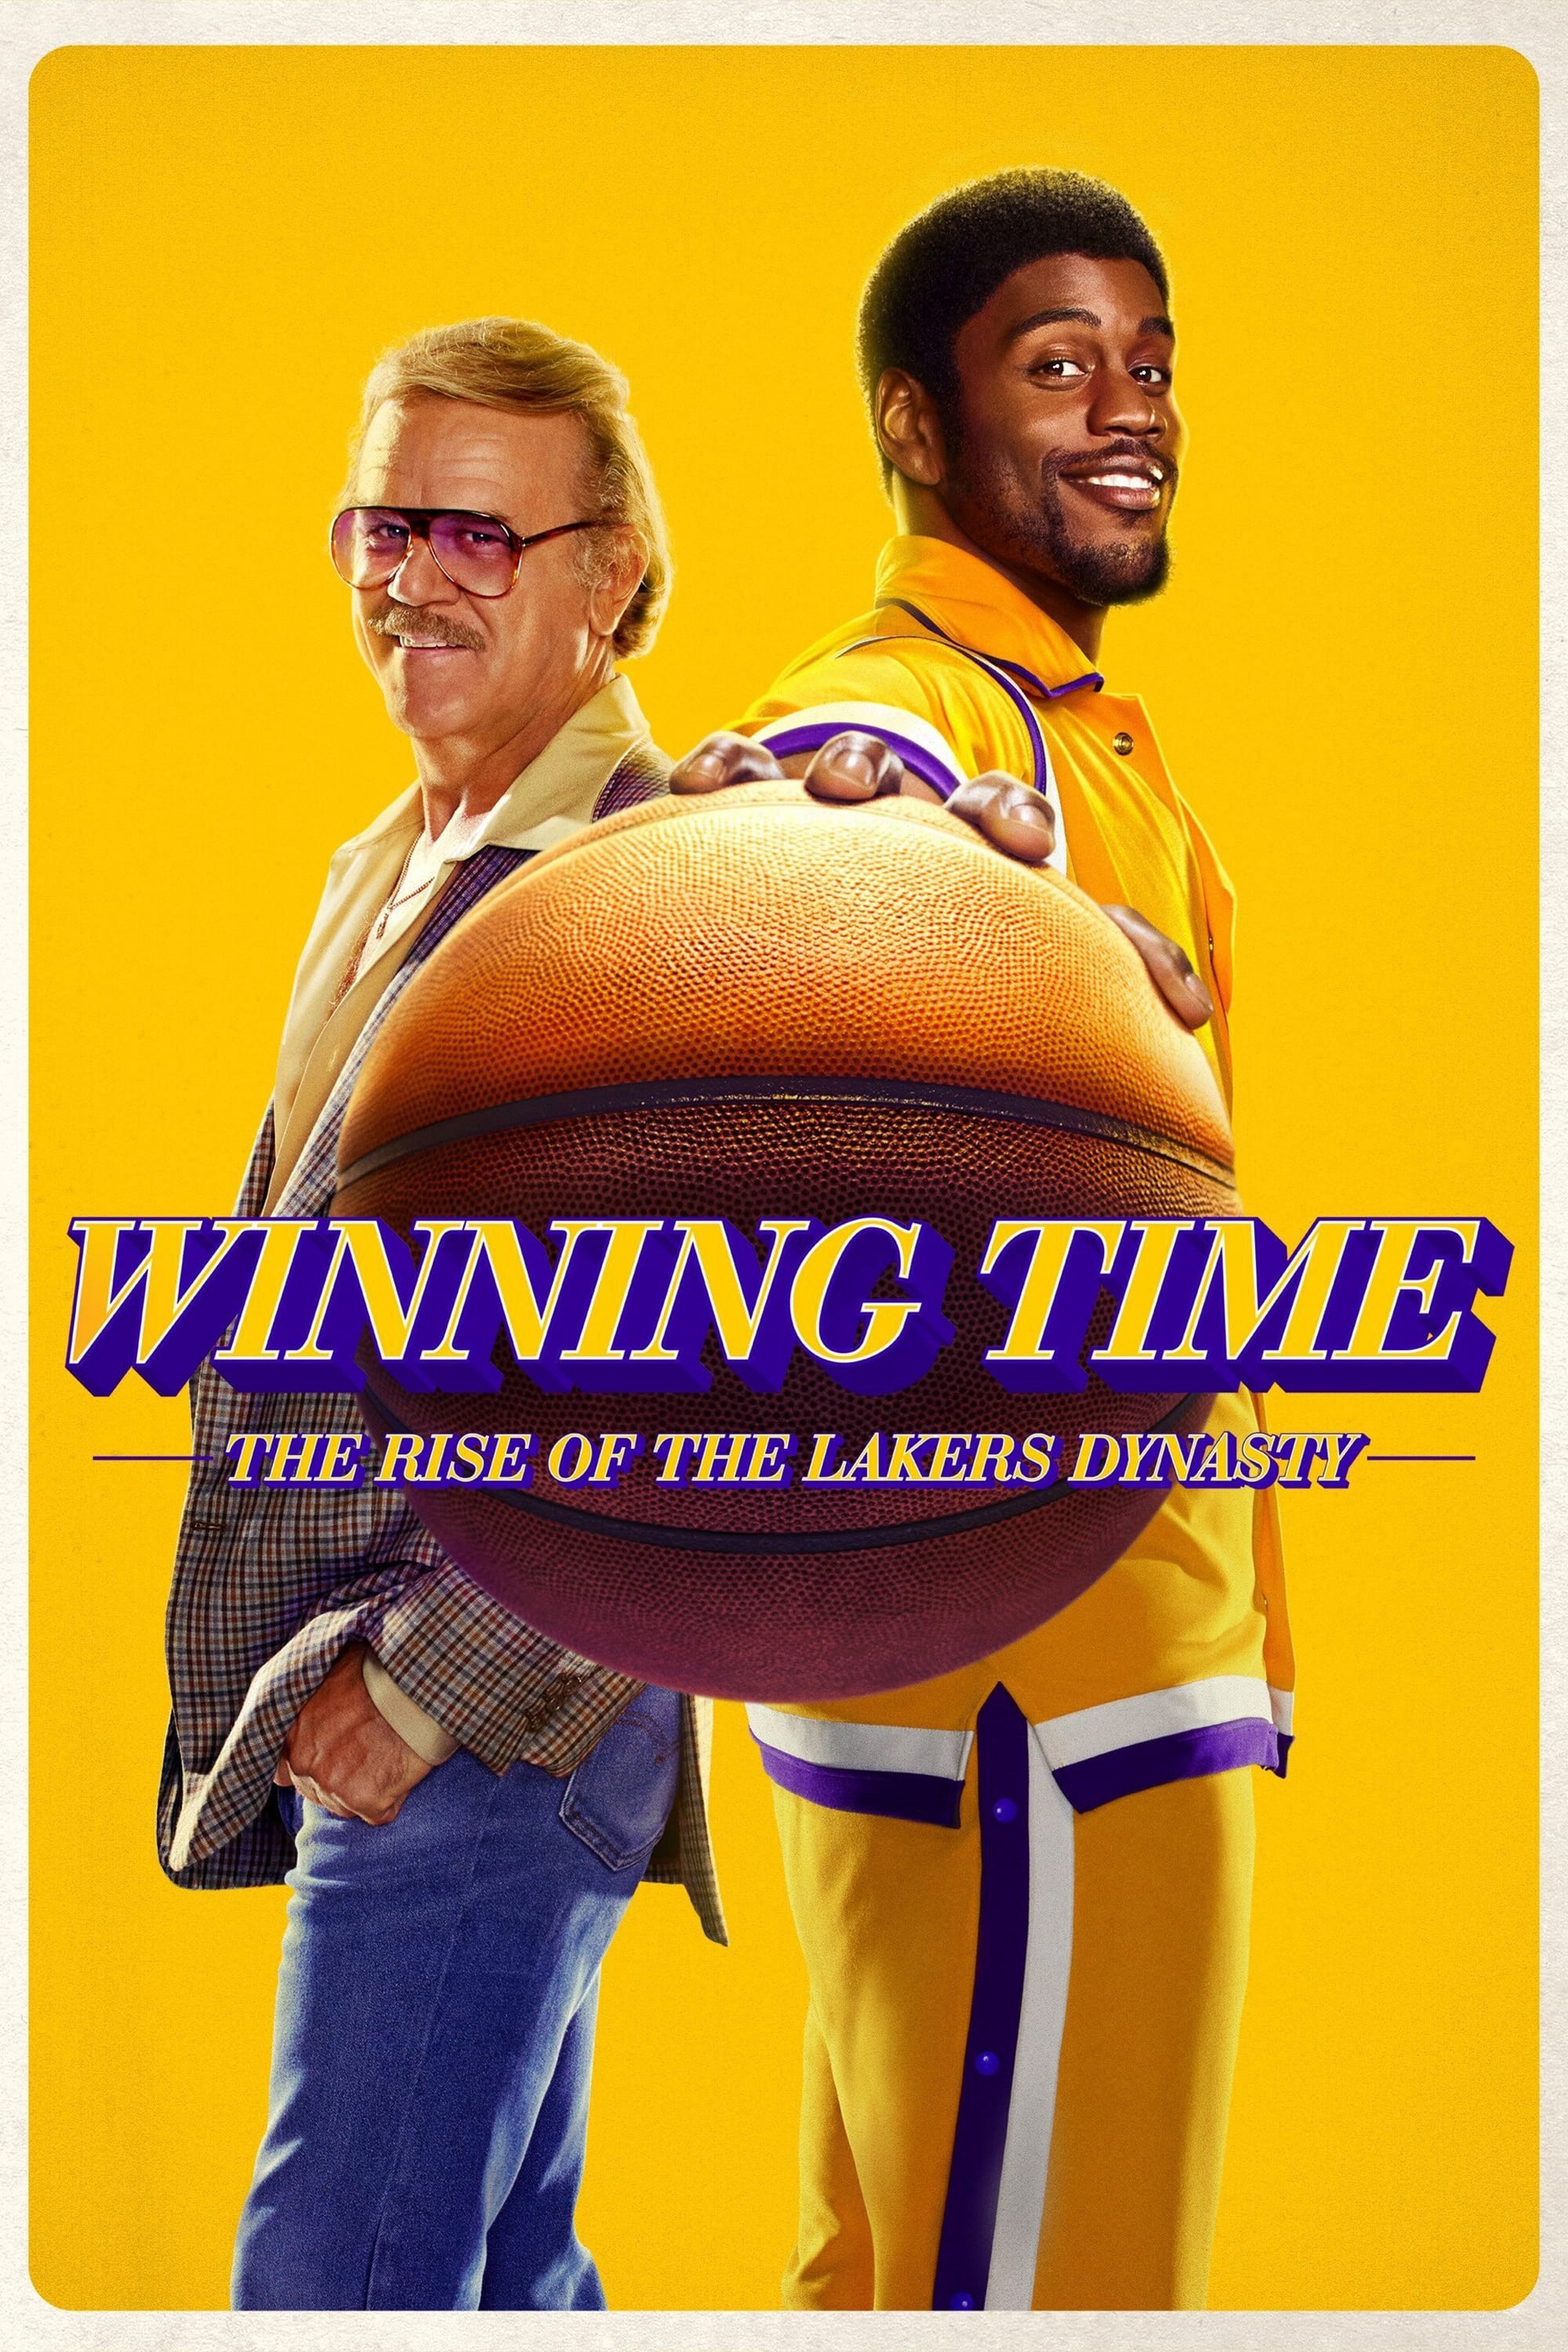 Winning Time: The Rise of the Lakers Dynasty (Phần 1) - Winning Time: The Rise of the Lakers Dynasty (Phần 1) (2022)